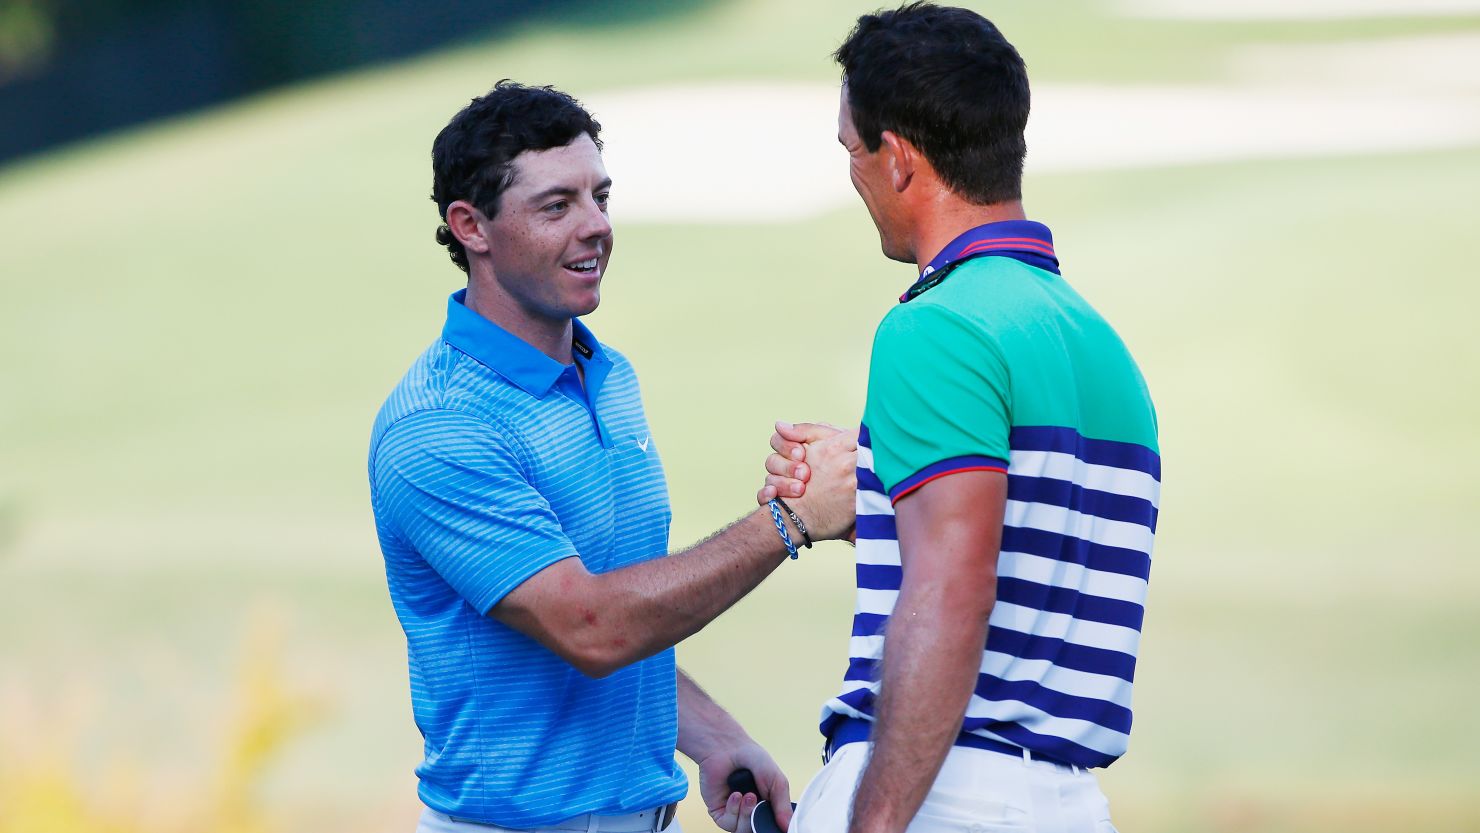 Rory McIlroy and Billy Horschel are tied for the lead on nine-under par after three rounds of the PGA Tour Championship.